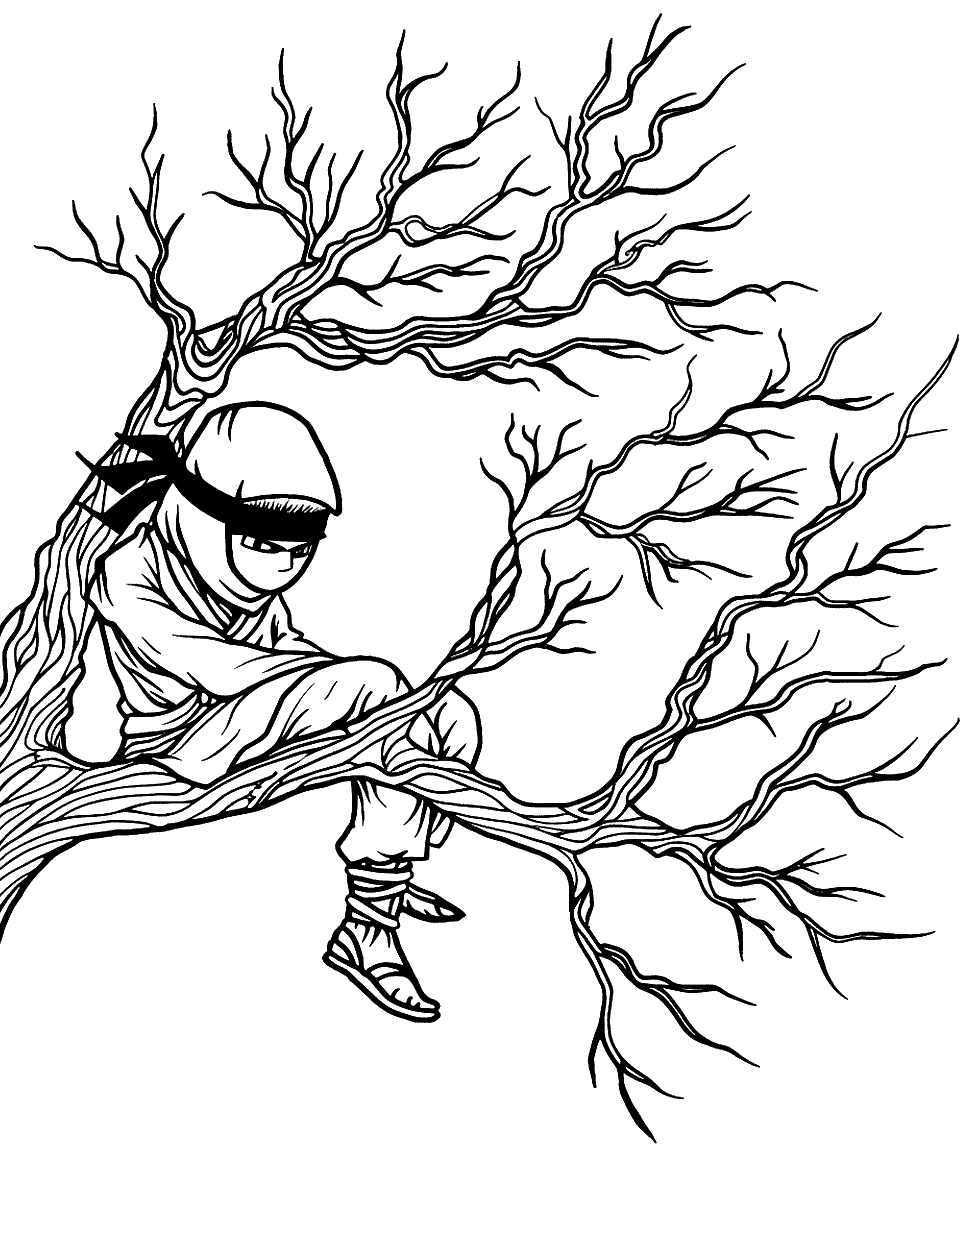 Hidden Ninja in a Tree Coloring Page - A ninja concealed within the branches of a large tree.